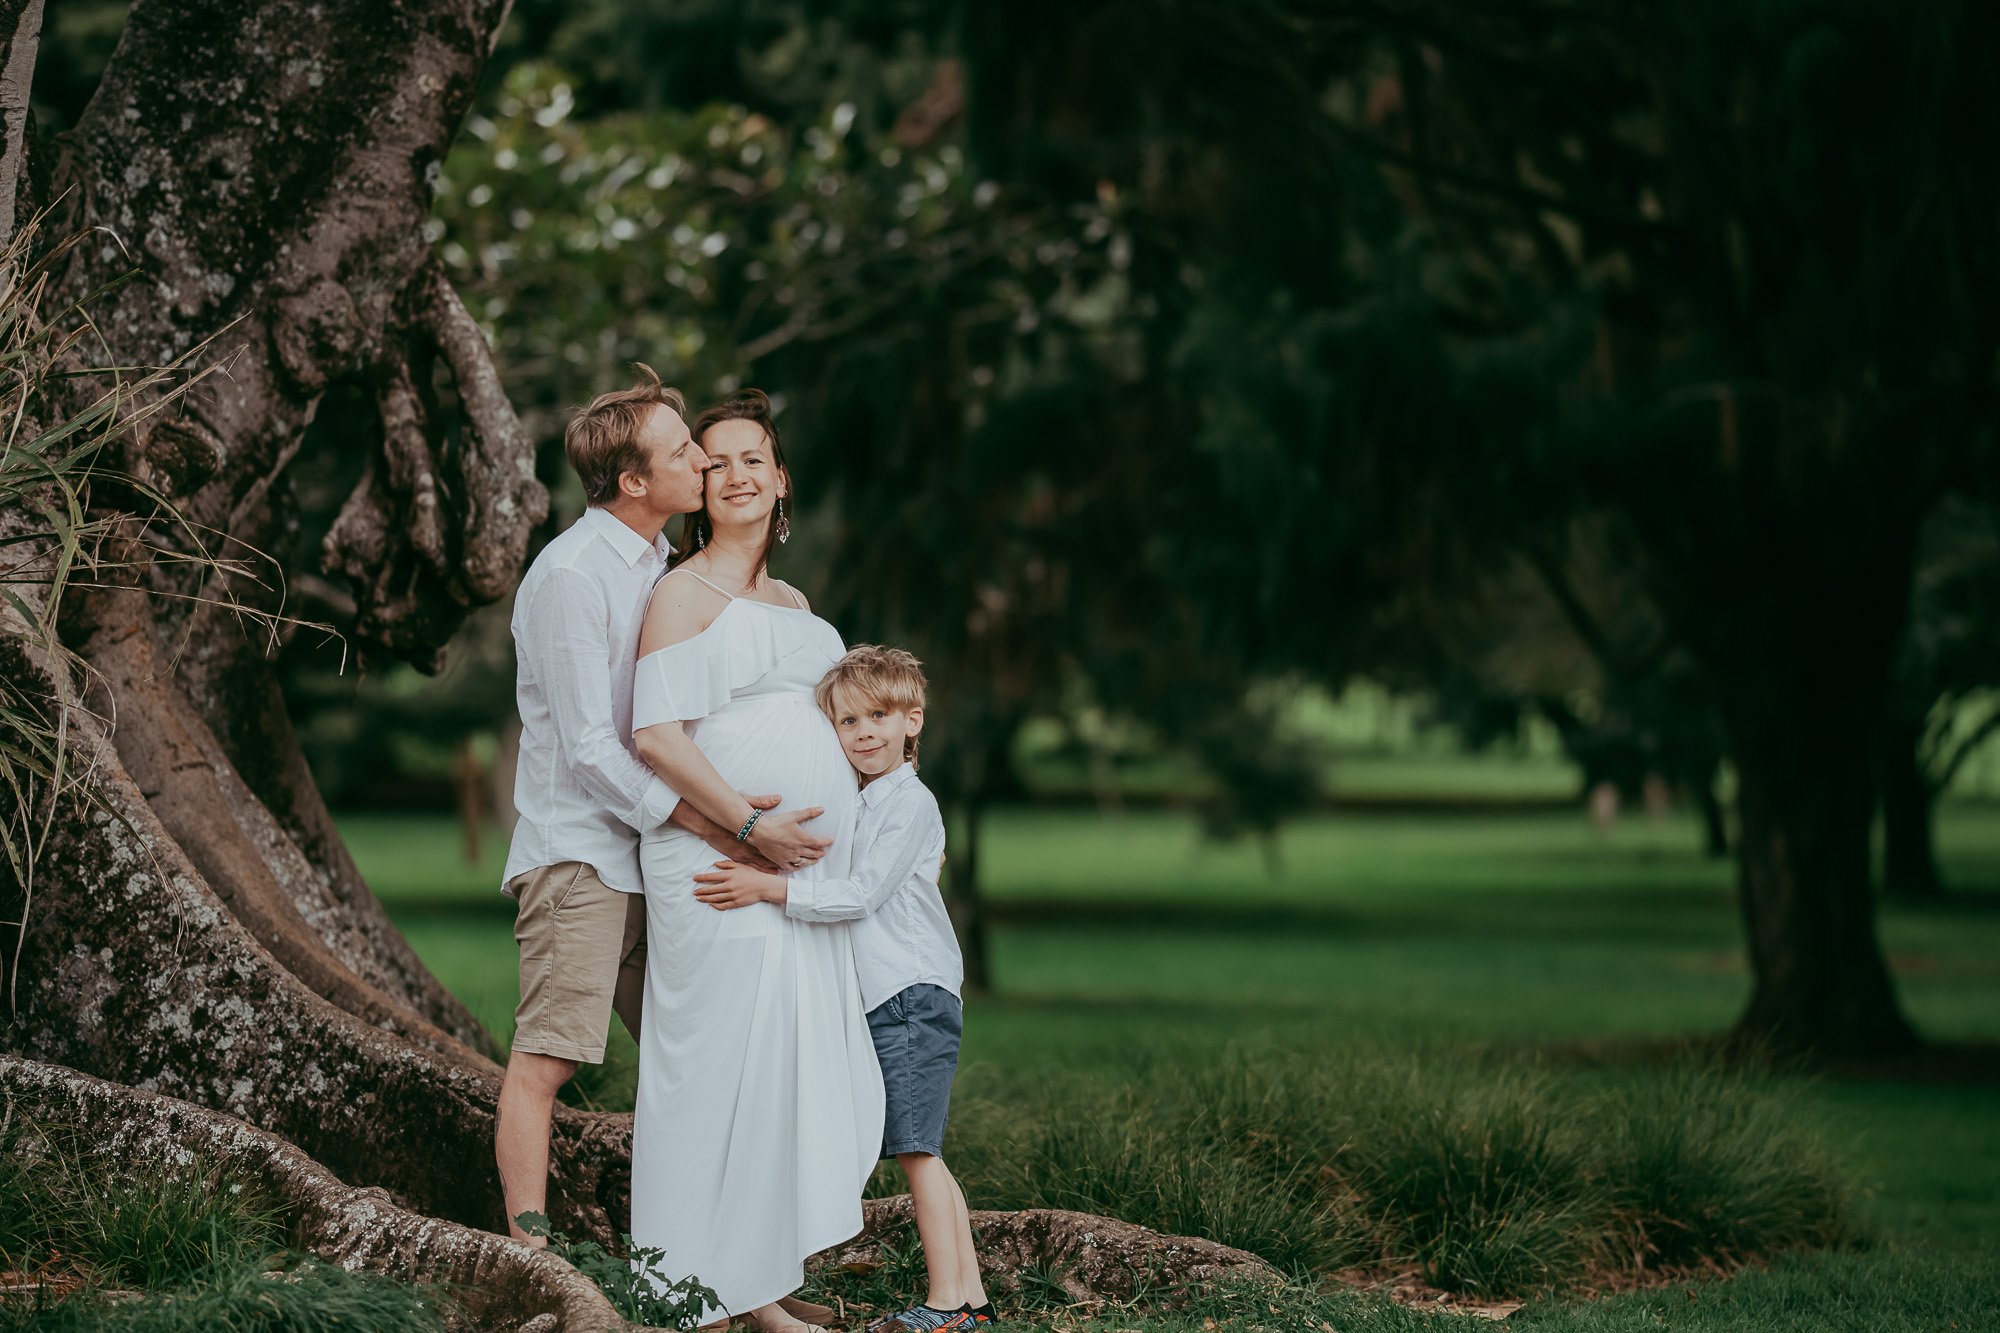 Blossom maternity session in Cornwall park {Auckland family-newborn photographer}